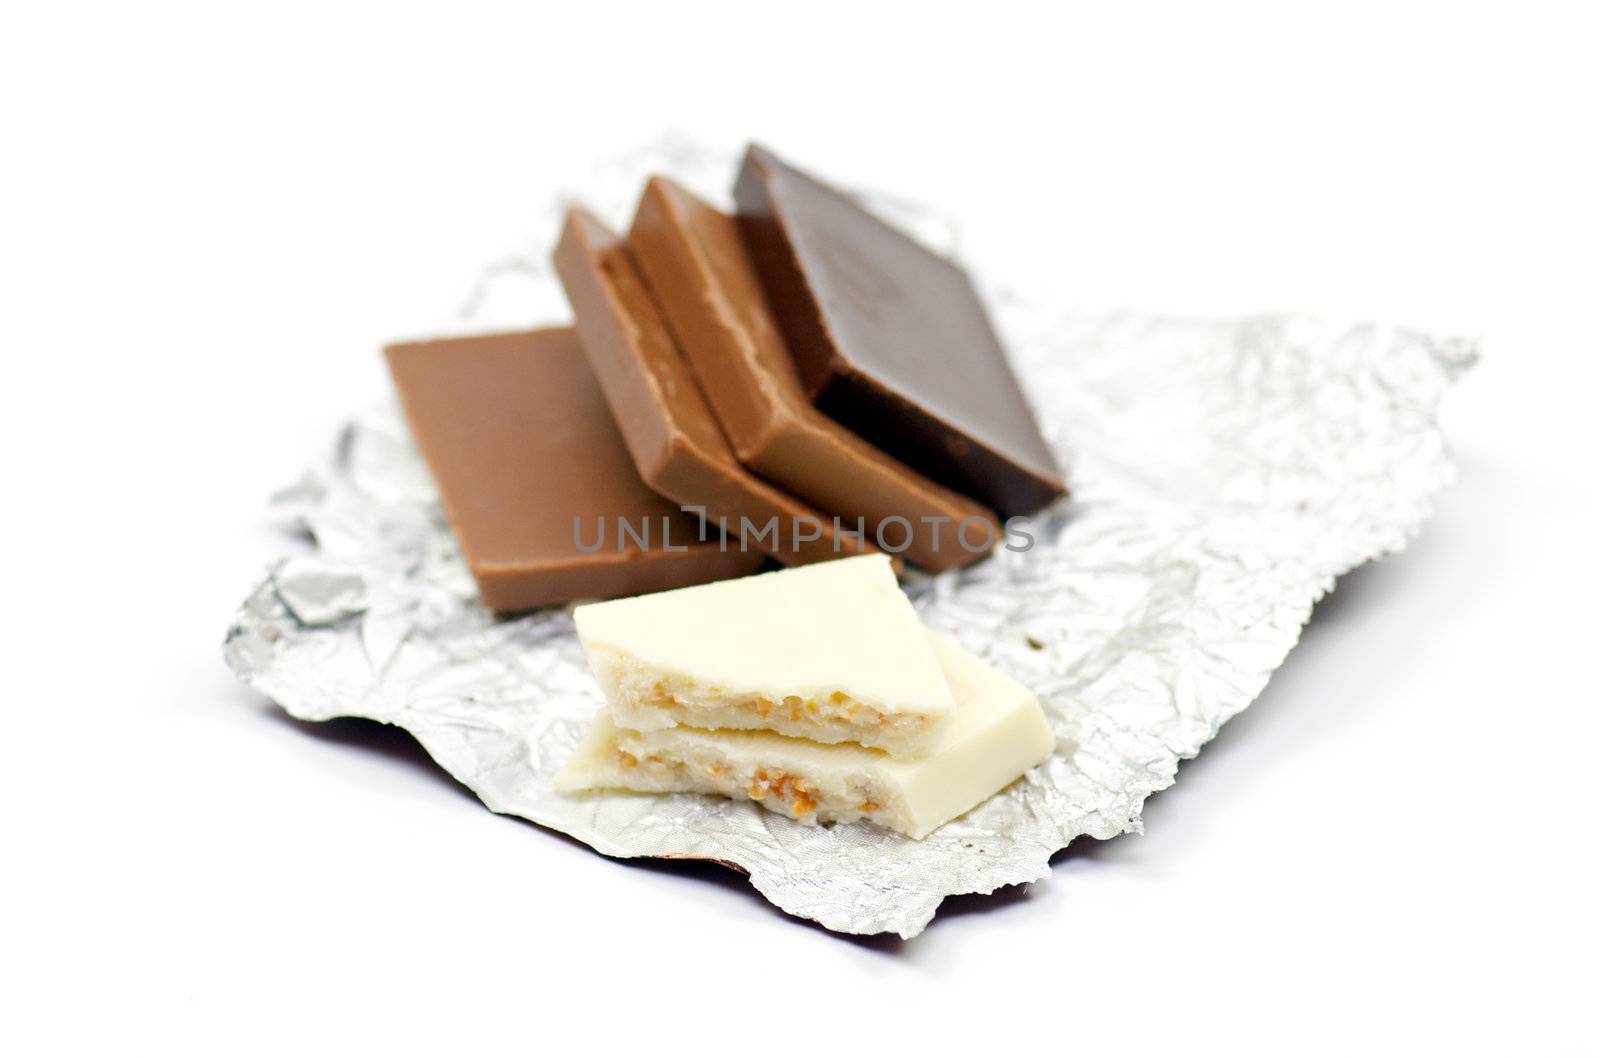 Slices of chocolate on a foil by zhekos